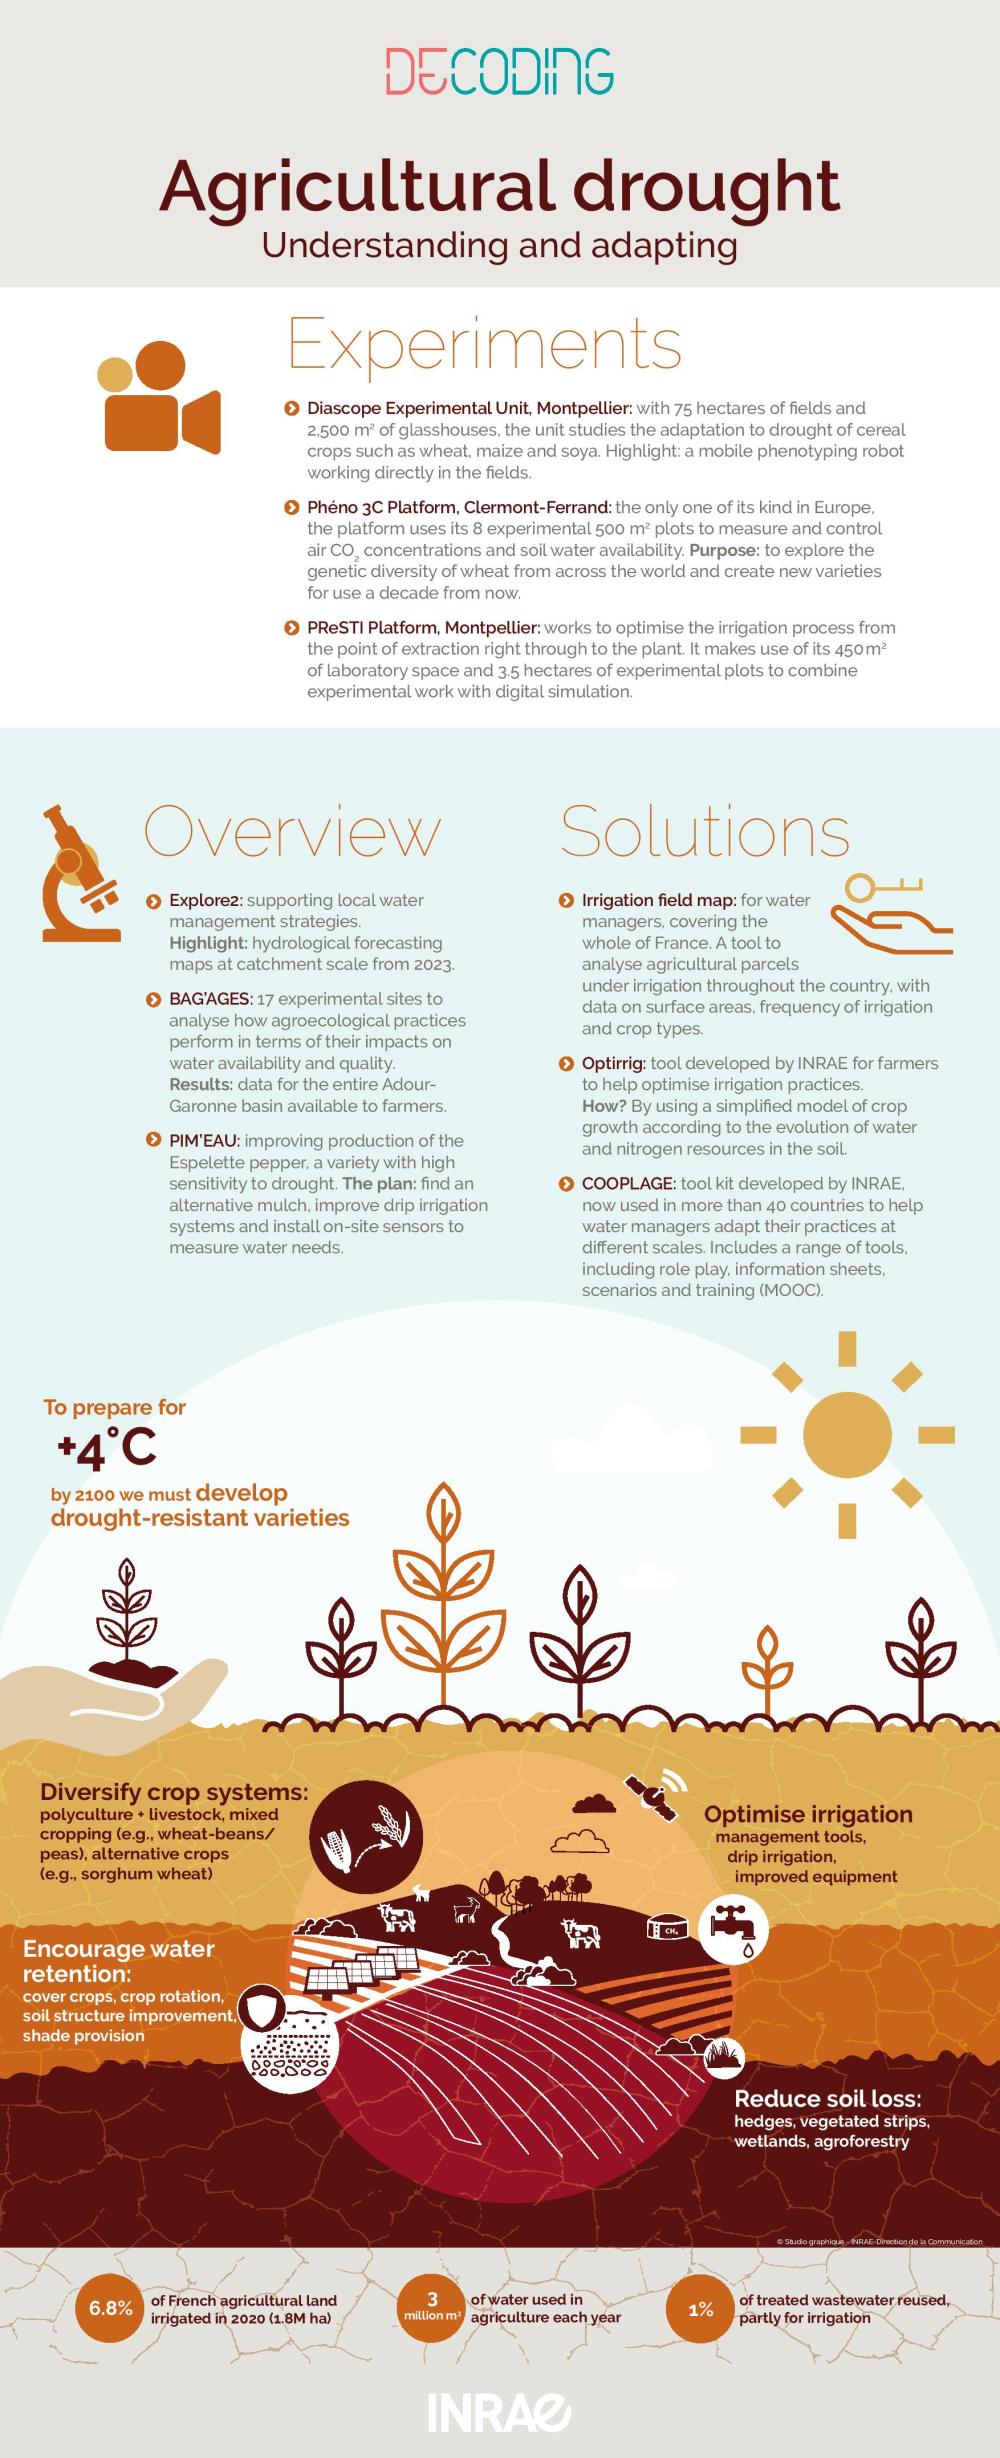 Infographic describing INRAE experiments and tools to adapt agriculture to increasing drought